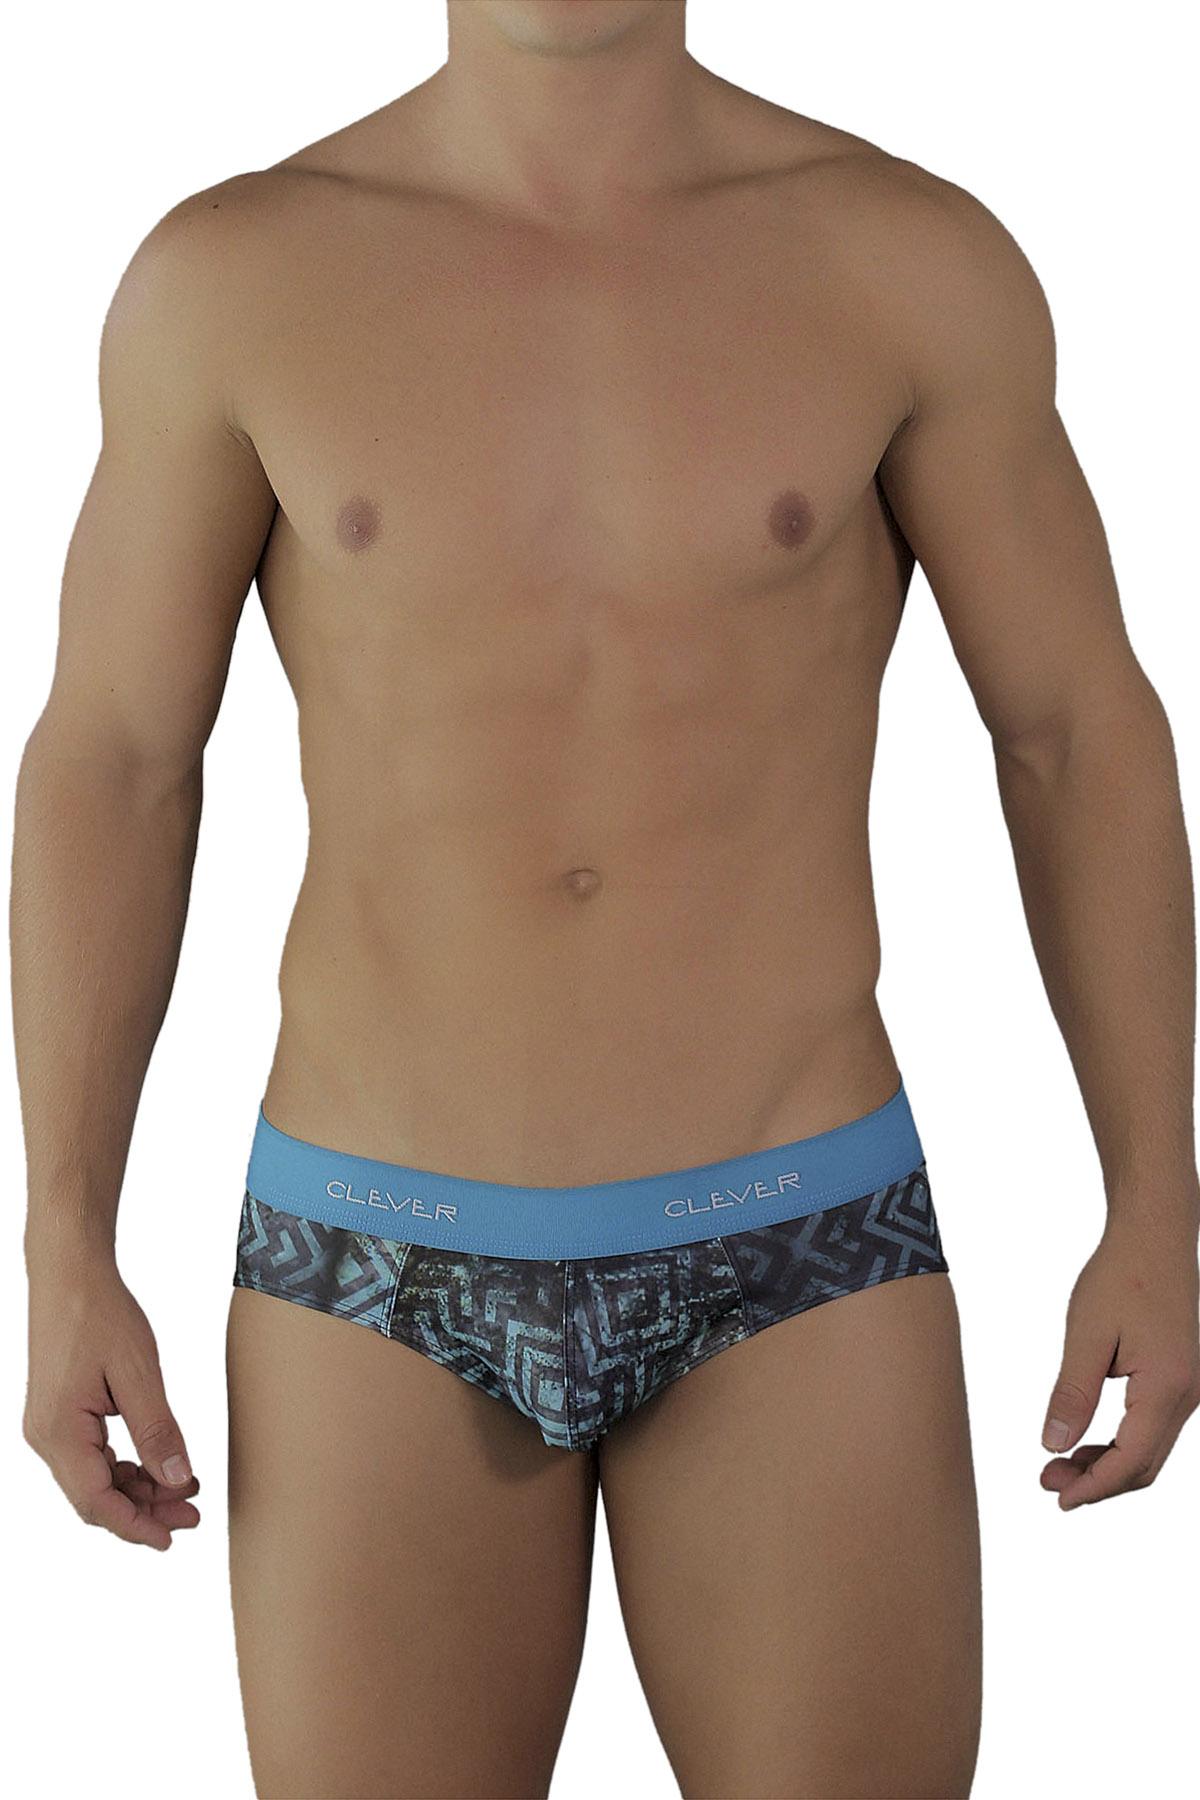 Clever Limited Edition Turquoise/Black Latin Brief 509980